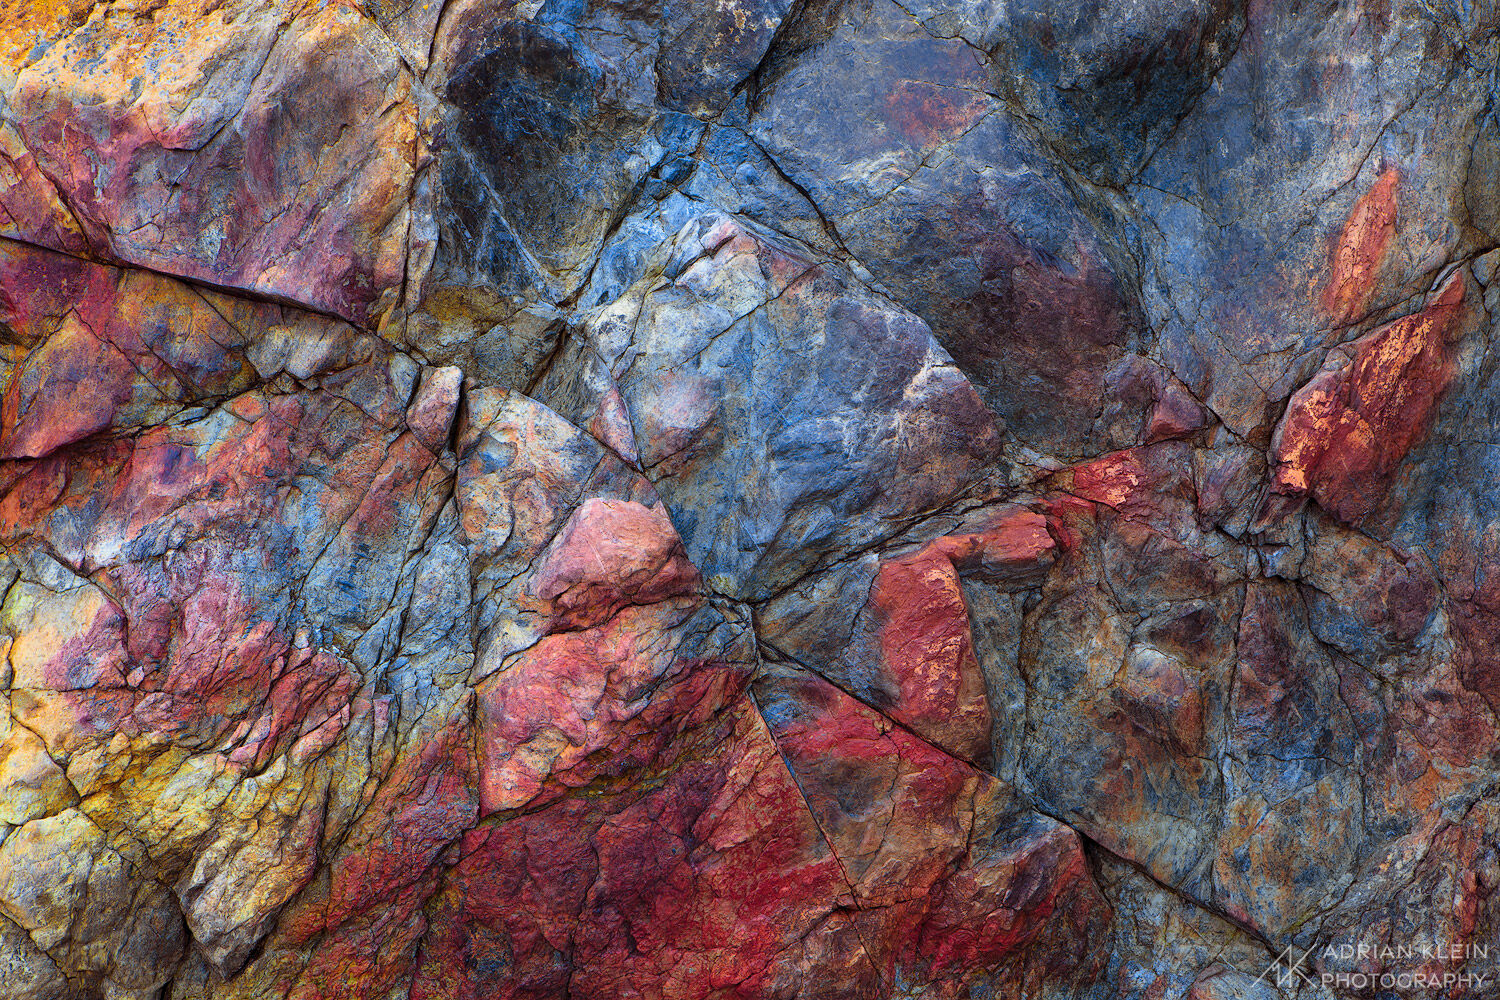 A wide array of colors and in one large rough boulder along the Central Oregon Coast. Limited Edition of 50.